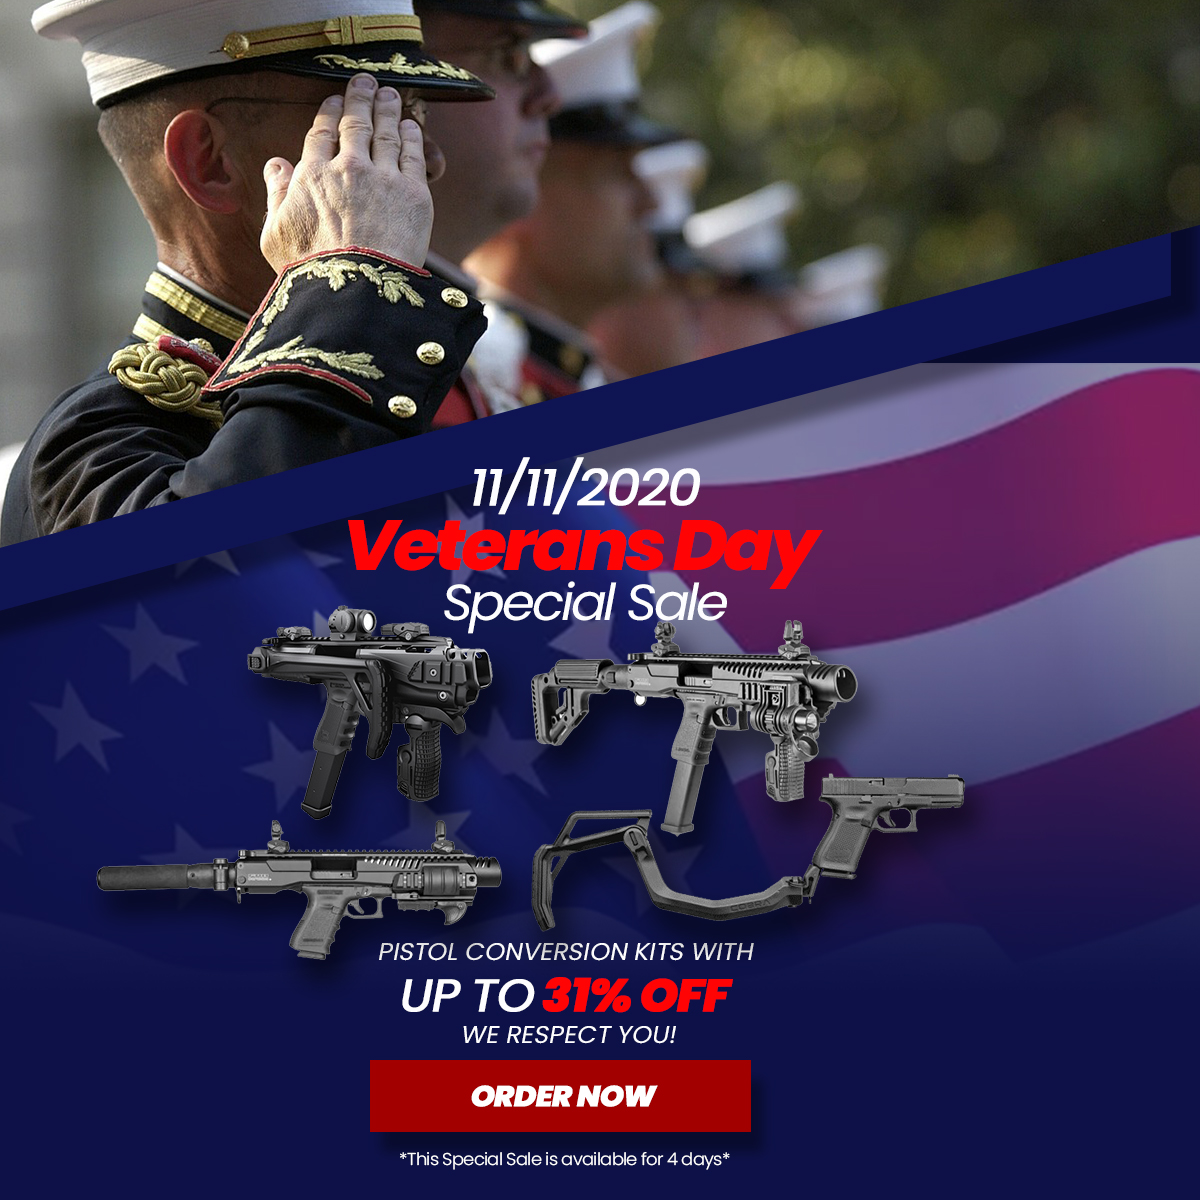 Veterans Day 11/11/20 Sale Pistol Conversion Kits with up to 57% OFF - $57